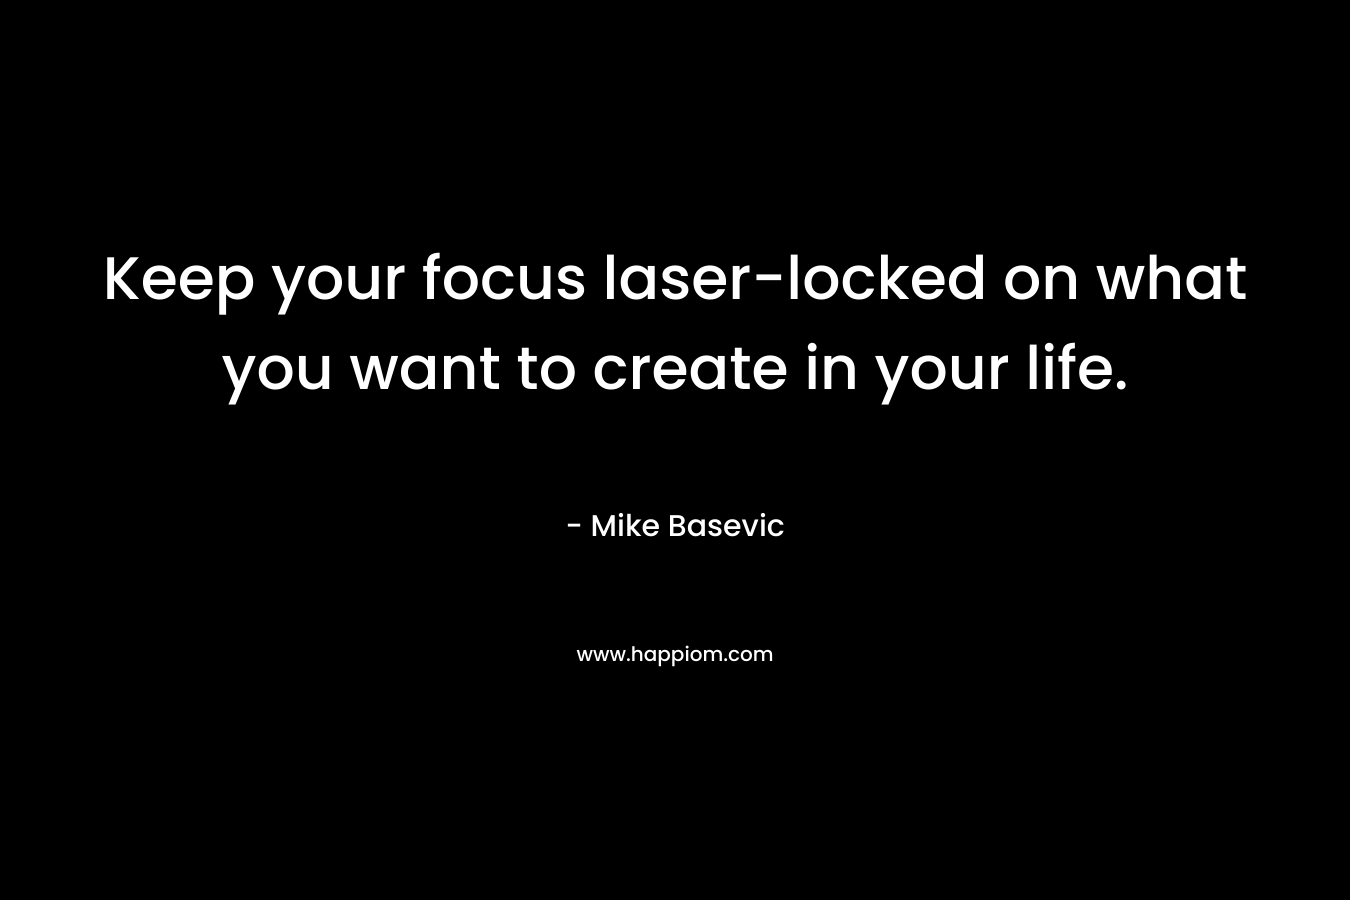 Keep your focus laser-locked on what you want to create in your life.